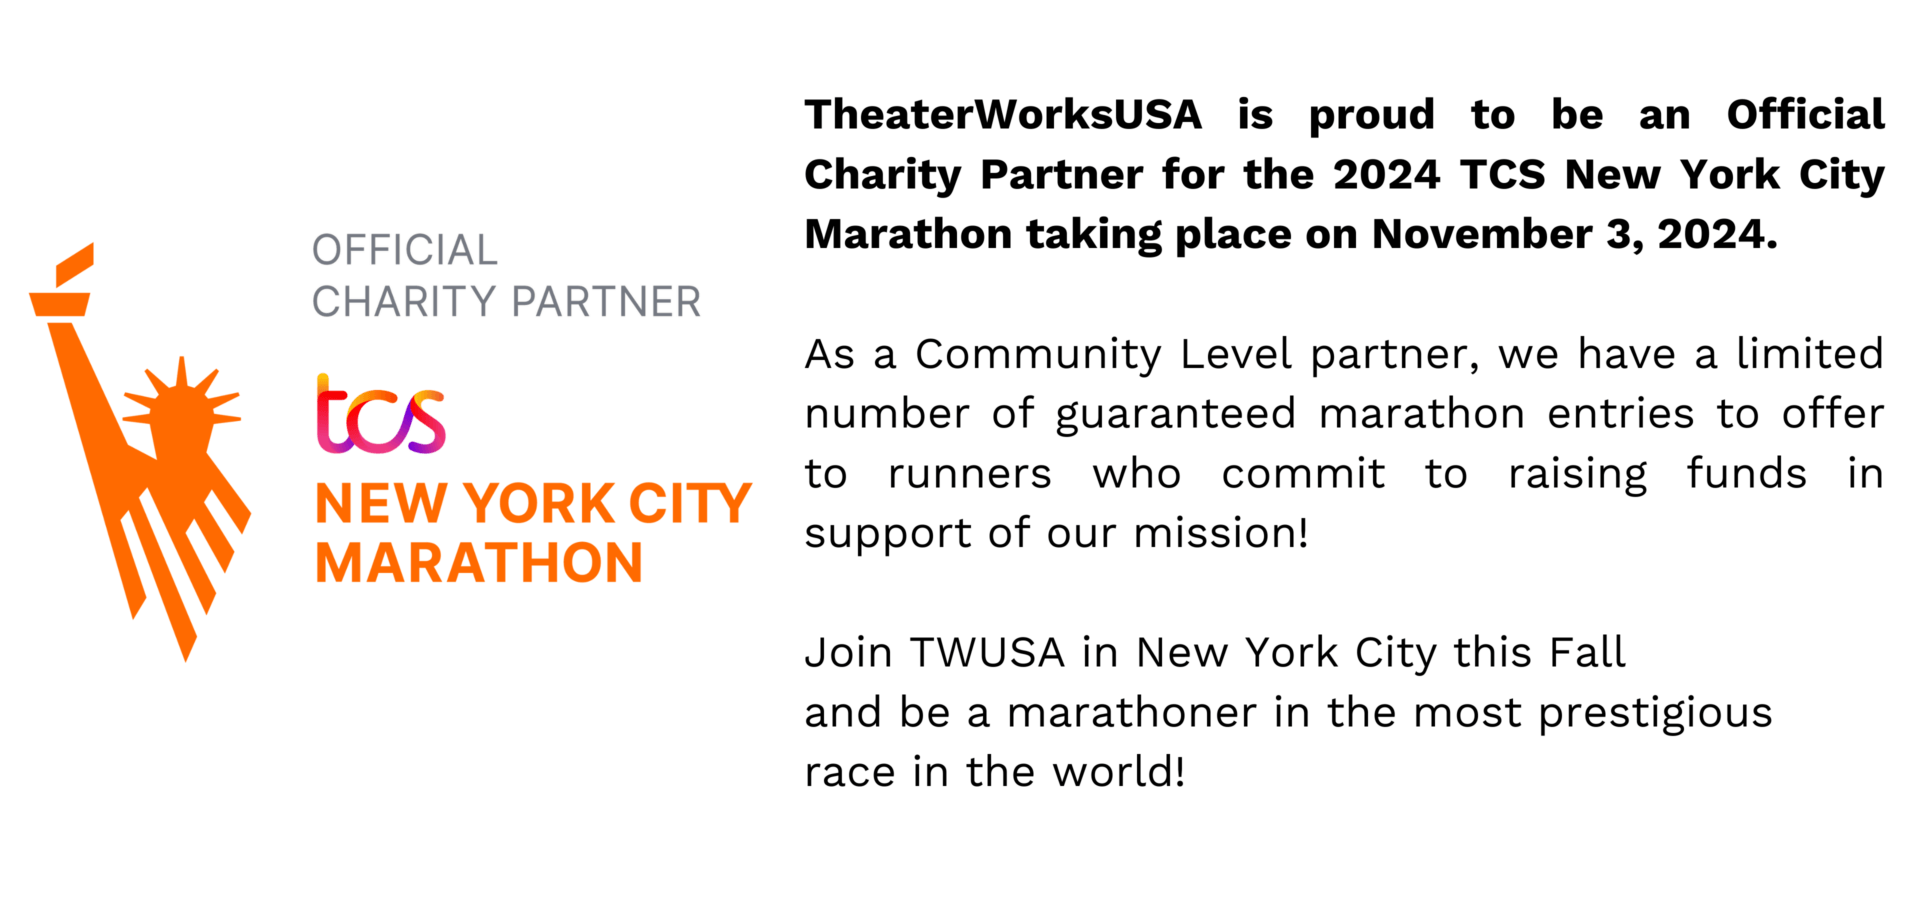 TheaterWorksUSA is proud to be an Official Charity Partner for the 2024 TCS New York City Marathon taking place on November 3, 2024.   As a Community Level partner, we have a limited number of guaranteed marathon entries to offer to runners who commit to raising funds in support of our mission!   Join TWUSA in New York City this Fall  and be a marathoner in the most prestigious  race in the world!